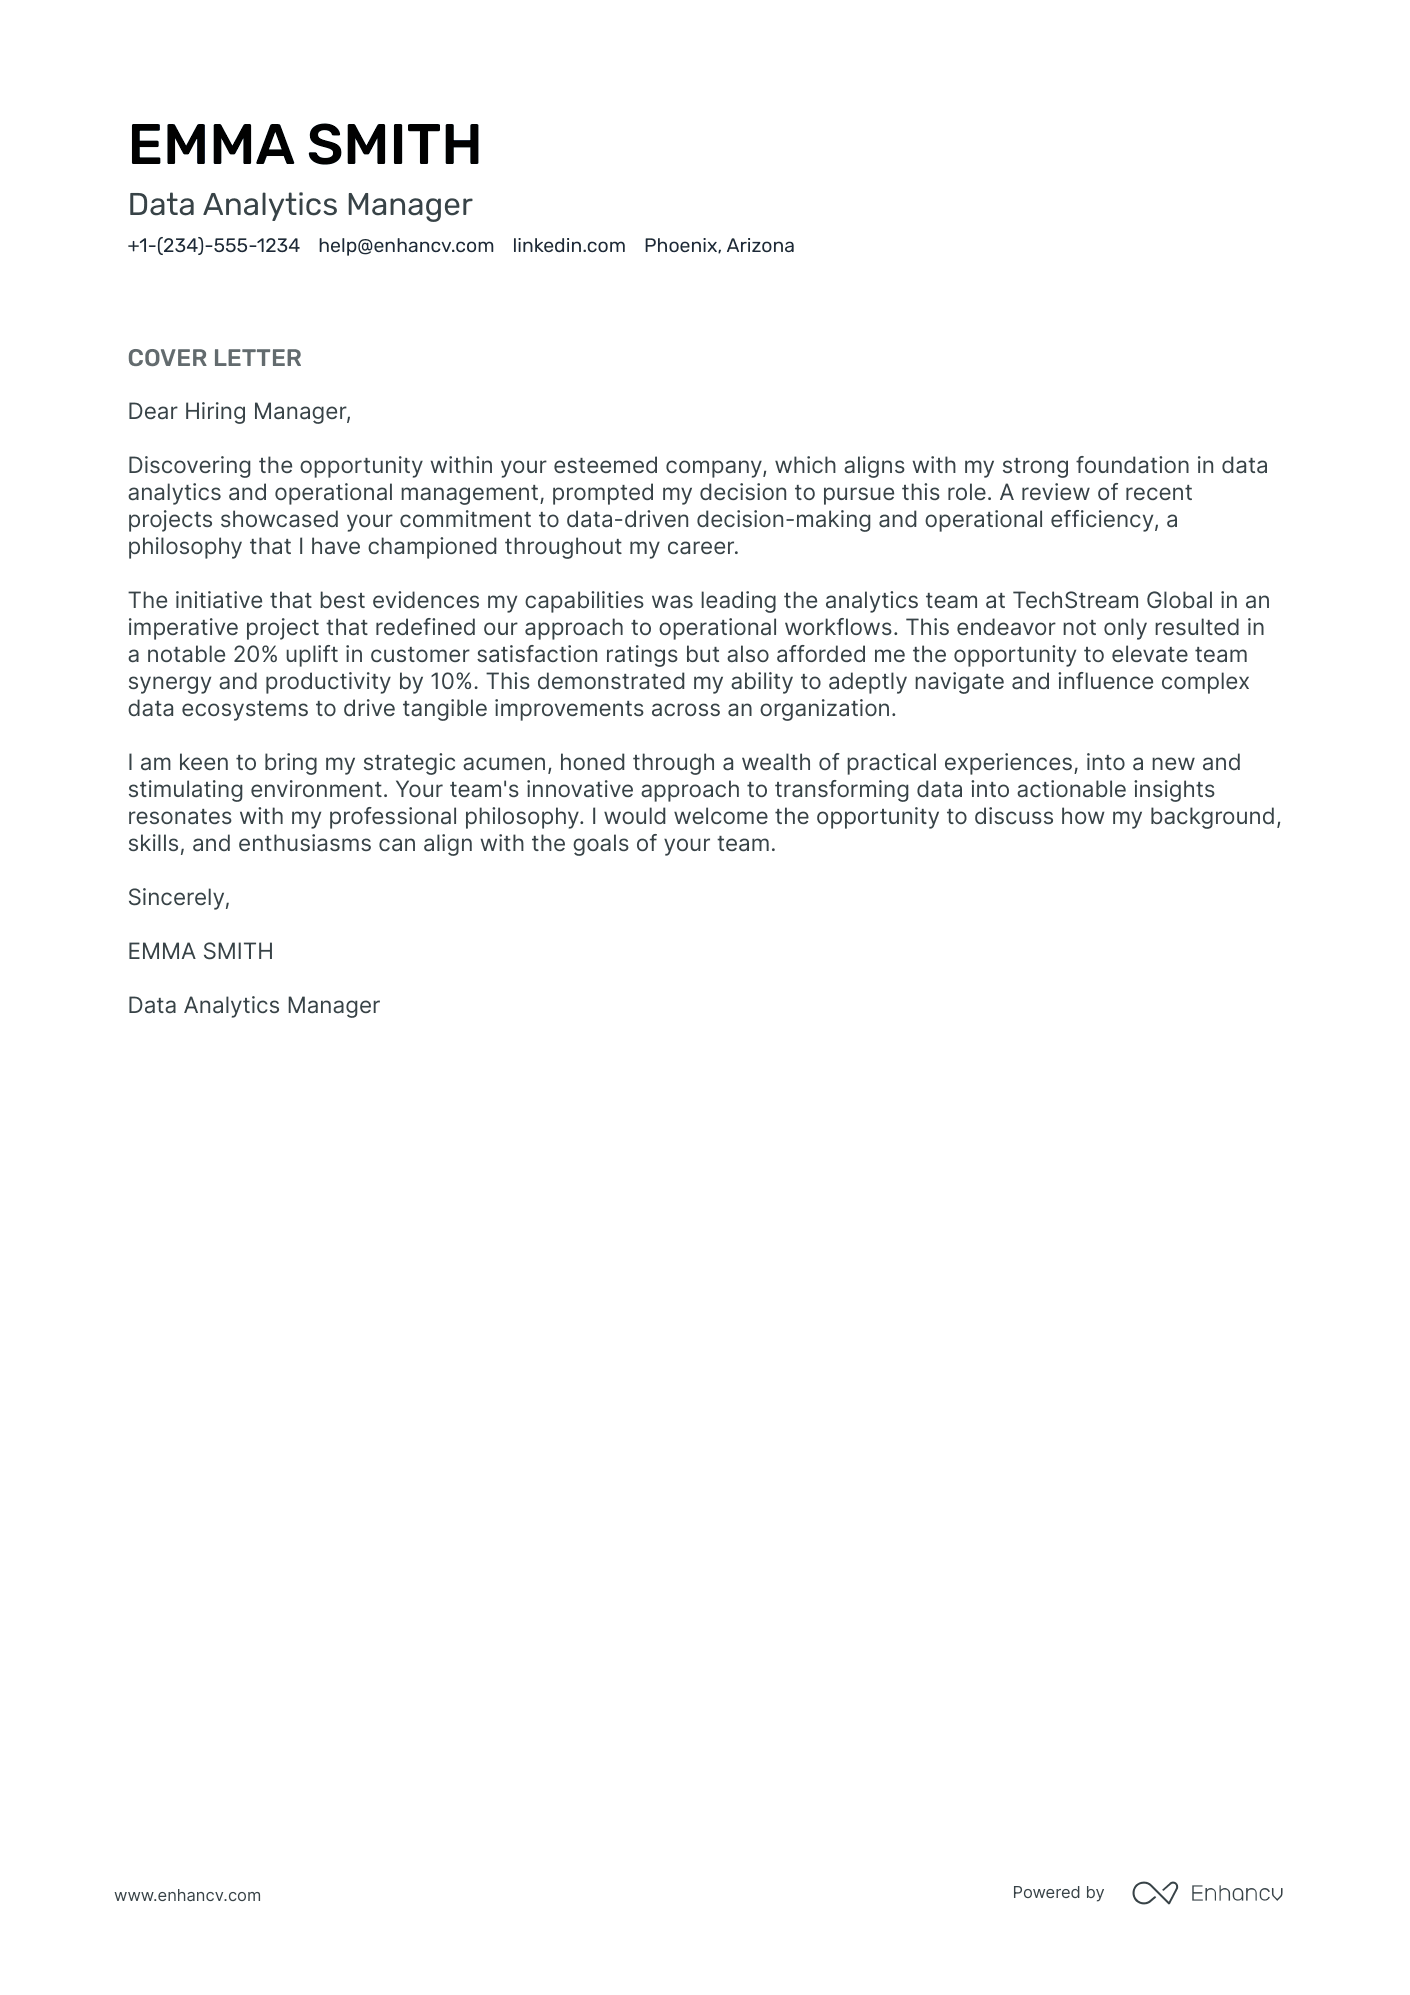 Analytics Manager cover letter